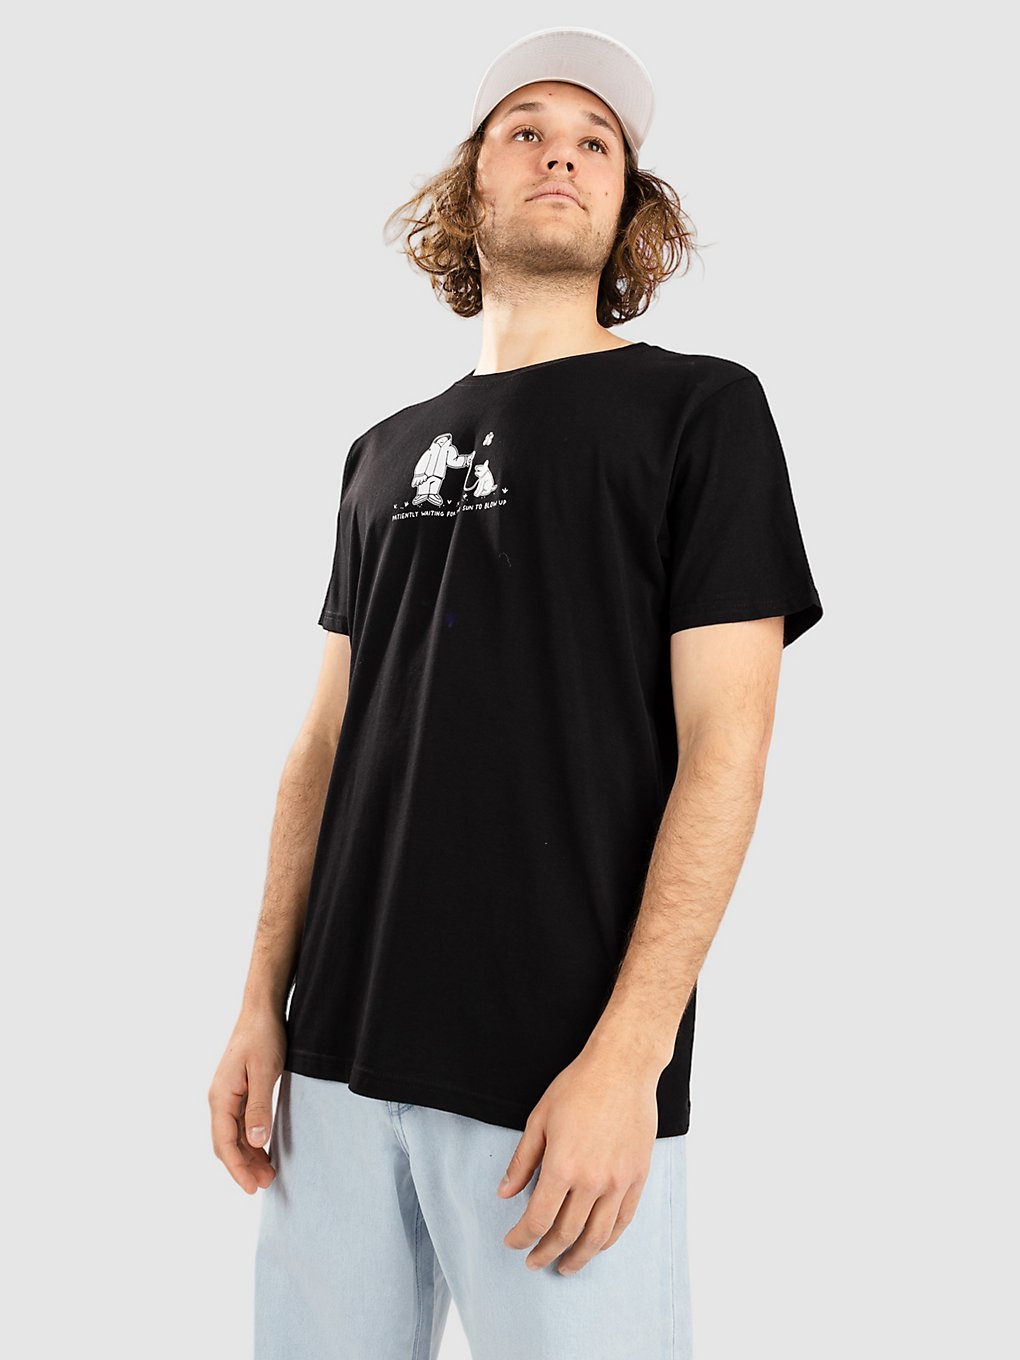 A.Lab Patiently Waiting T-Shirt black kaufen